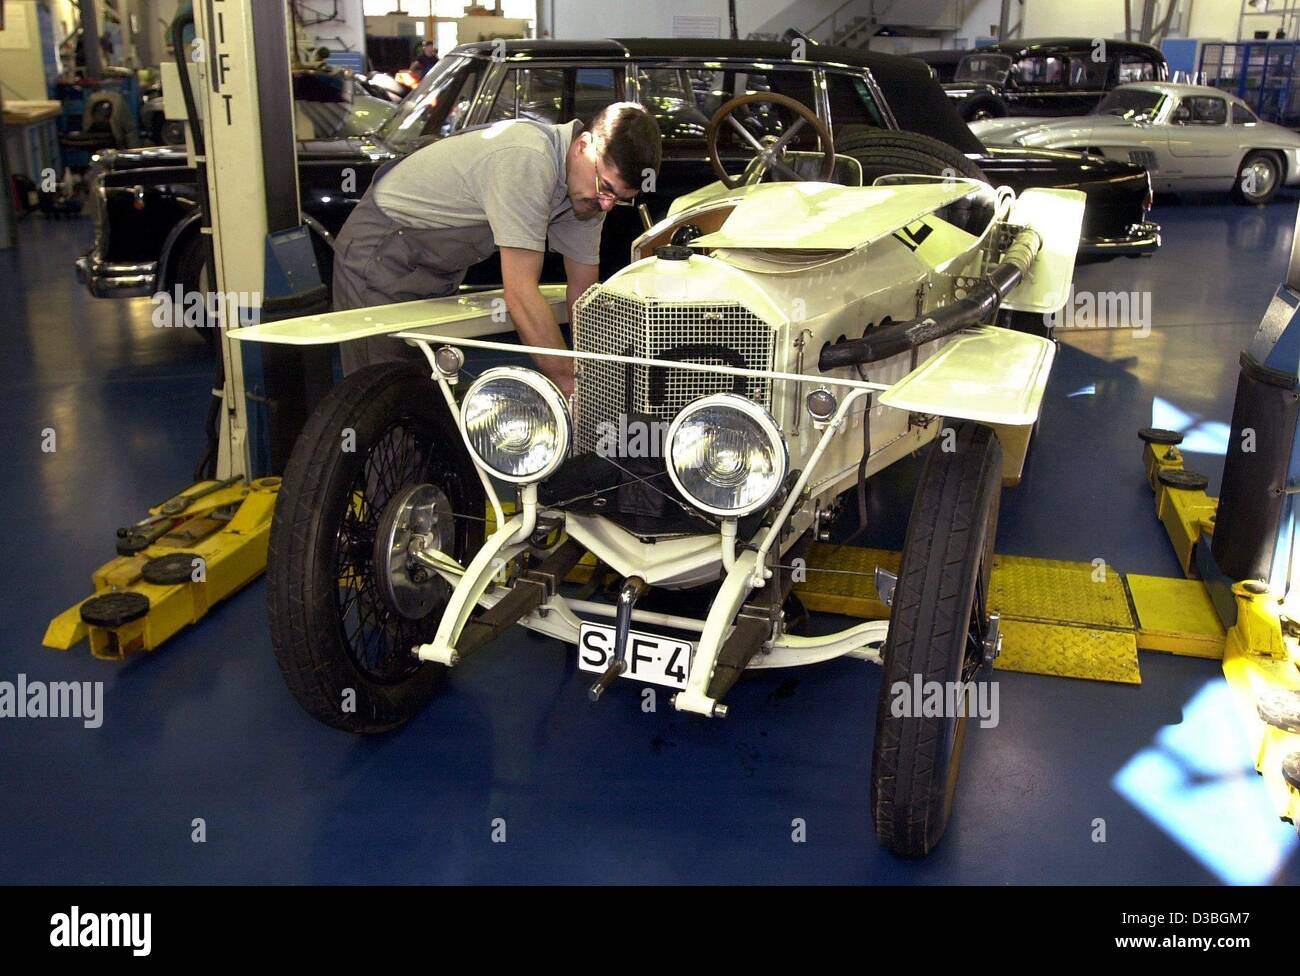 (dpa) - A mechanic is working on a historical Mercedes racing car in the Mercedes-Benz Classic Center in Fellbach near Stuttgart, Germany, 17 April 2003. Celebrating its 10th anniversary, the Classic Center shows a great collection of vintage cars. The Classic Center is the largest and most extensiv Stock Photo